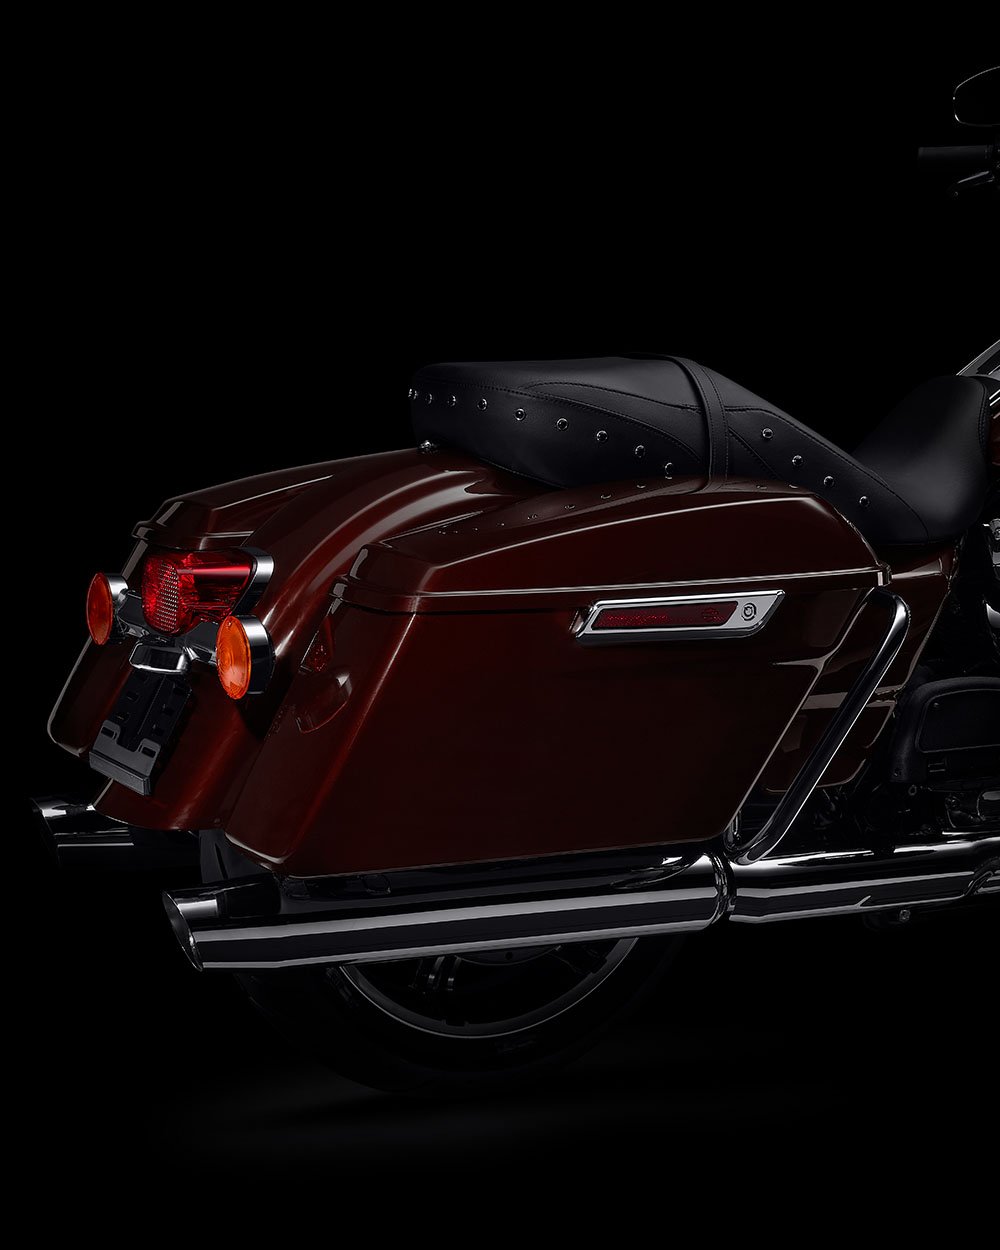 One-Touch Opening Saddlebags on a 2022 Road King motorcycle